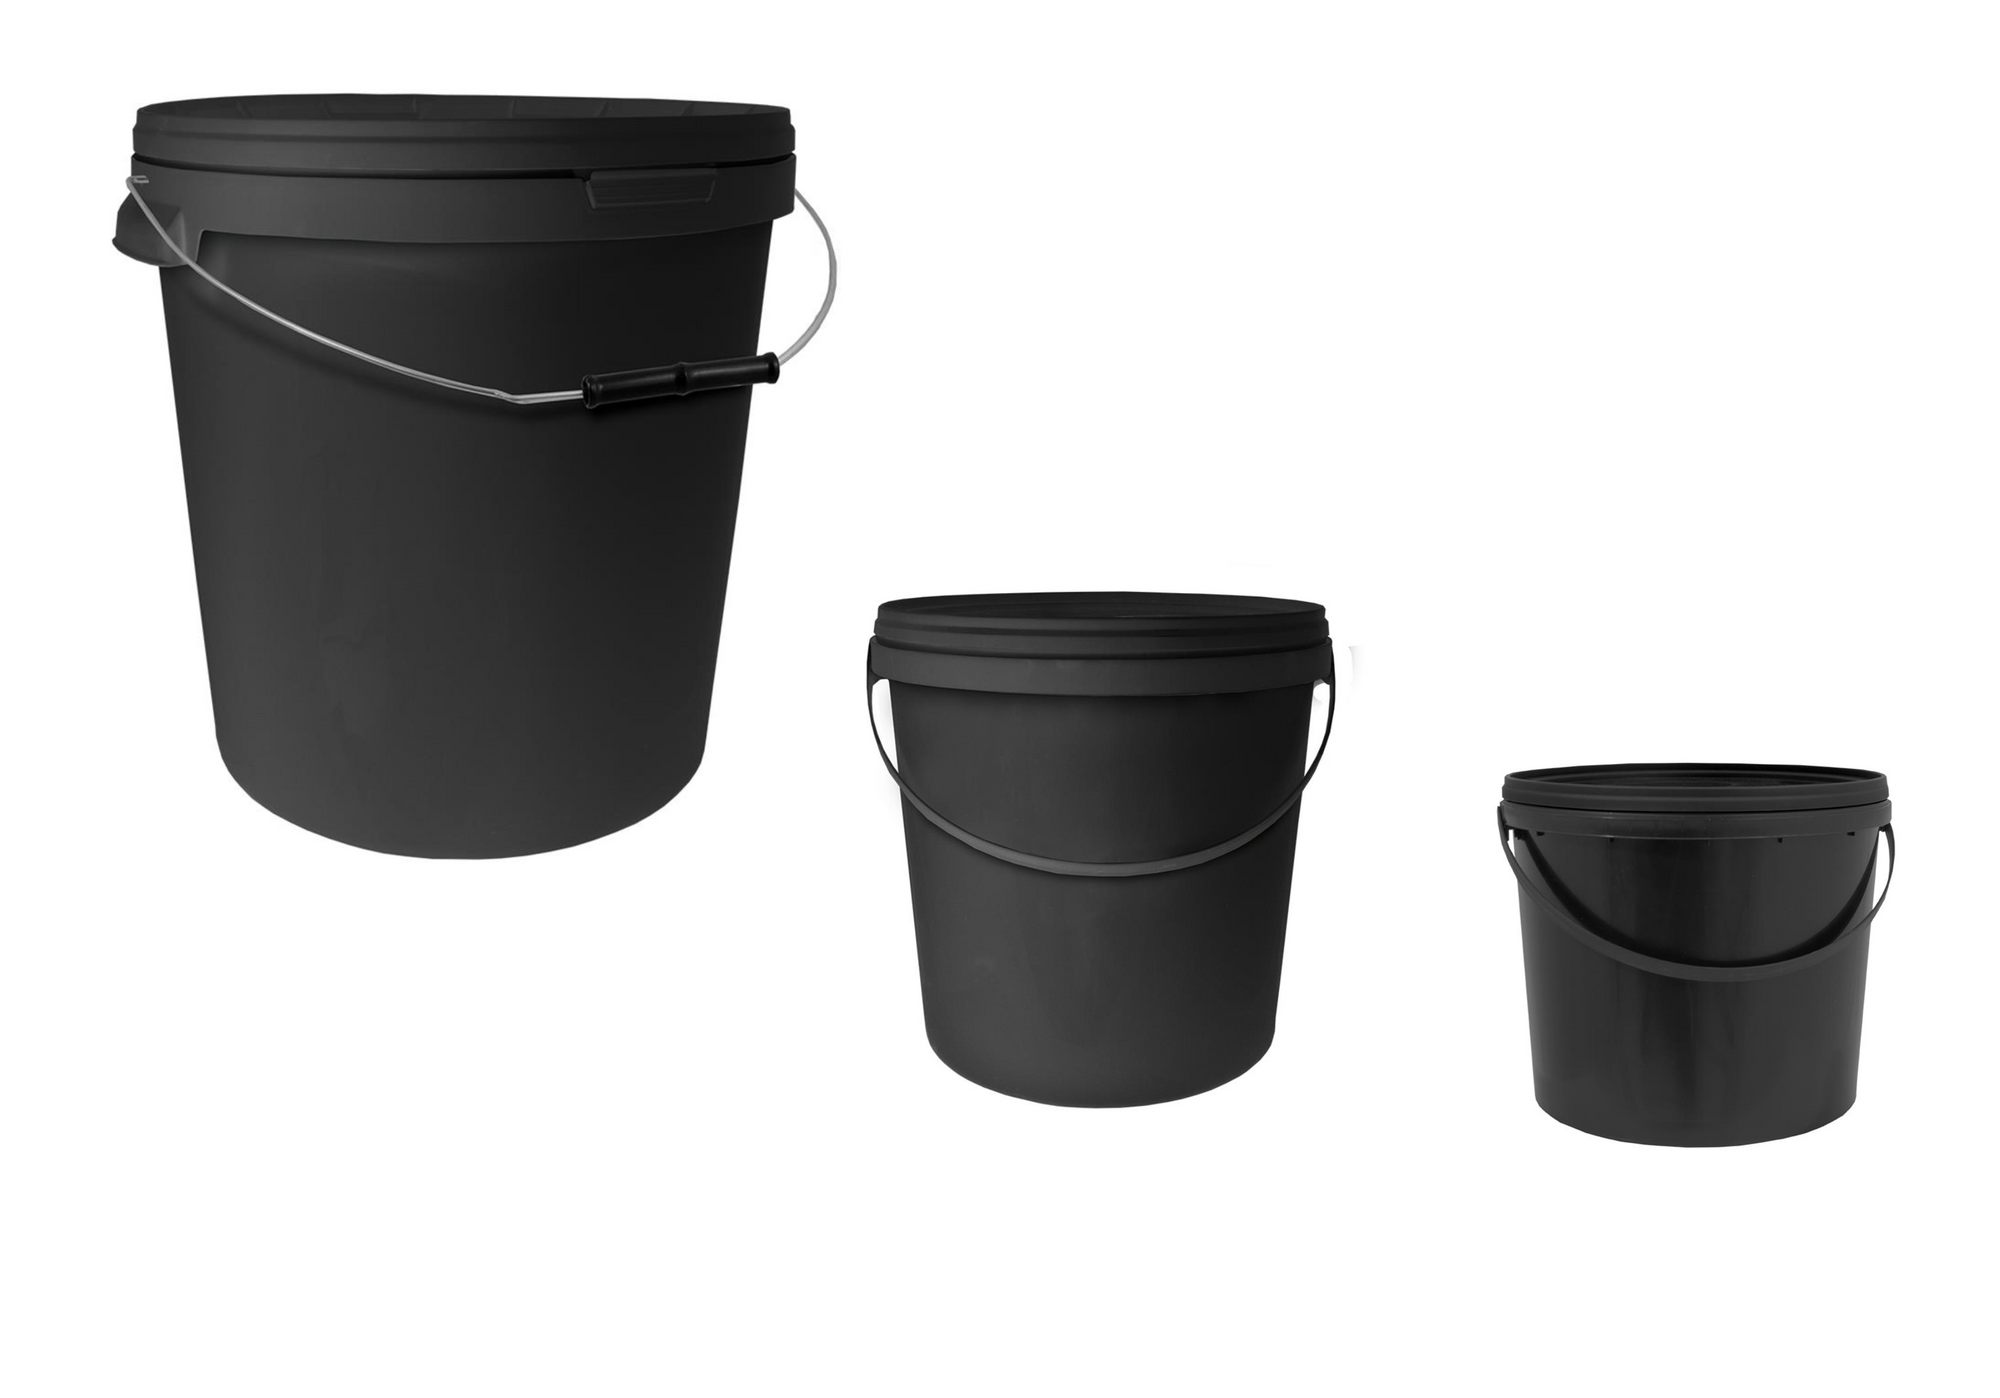 Black Buckets With Handles